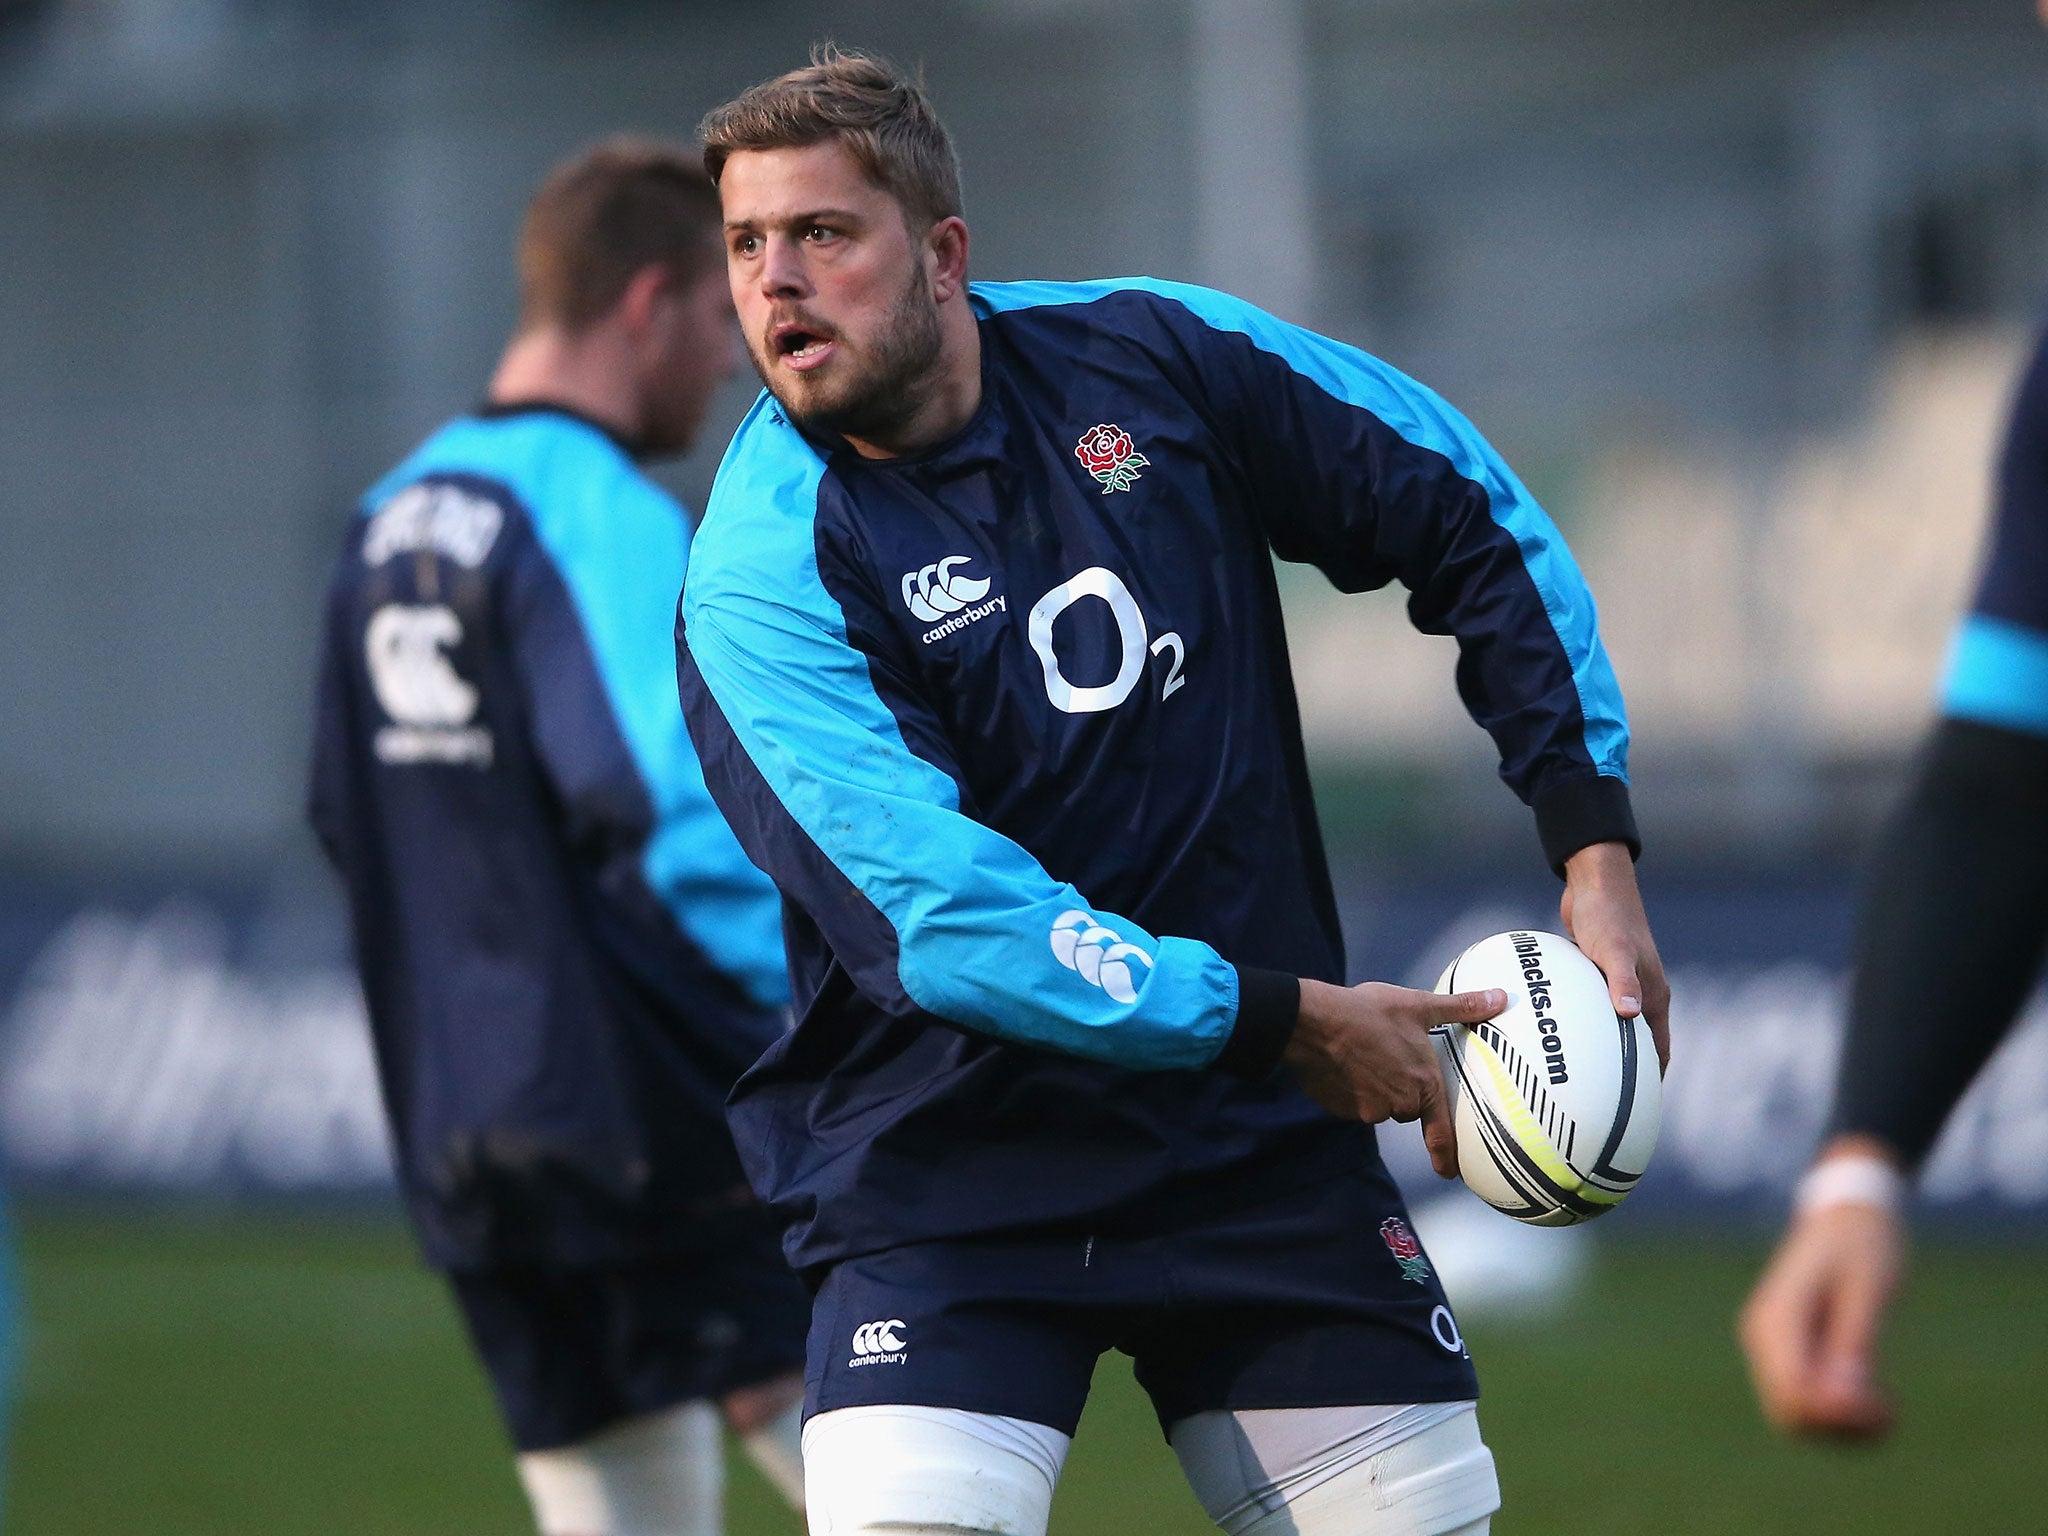 Ed Slater will captain England in the midweek match against the Crusaders